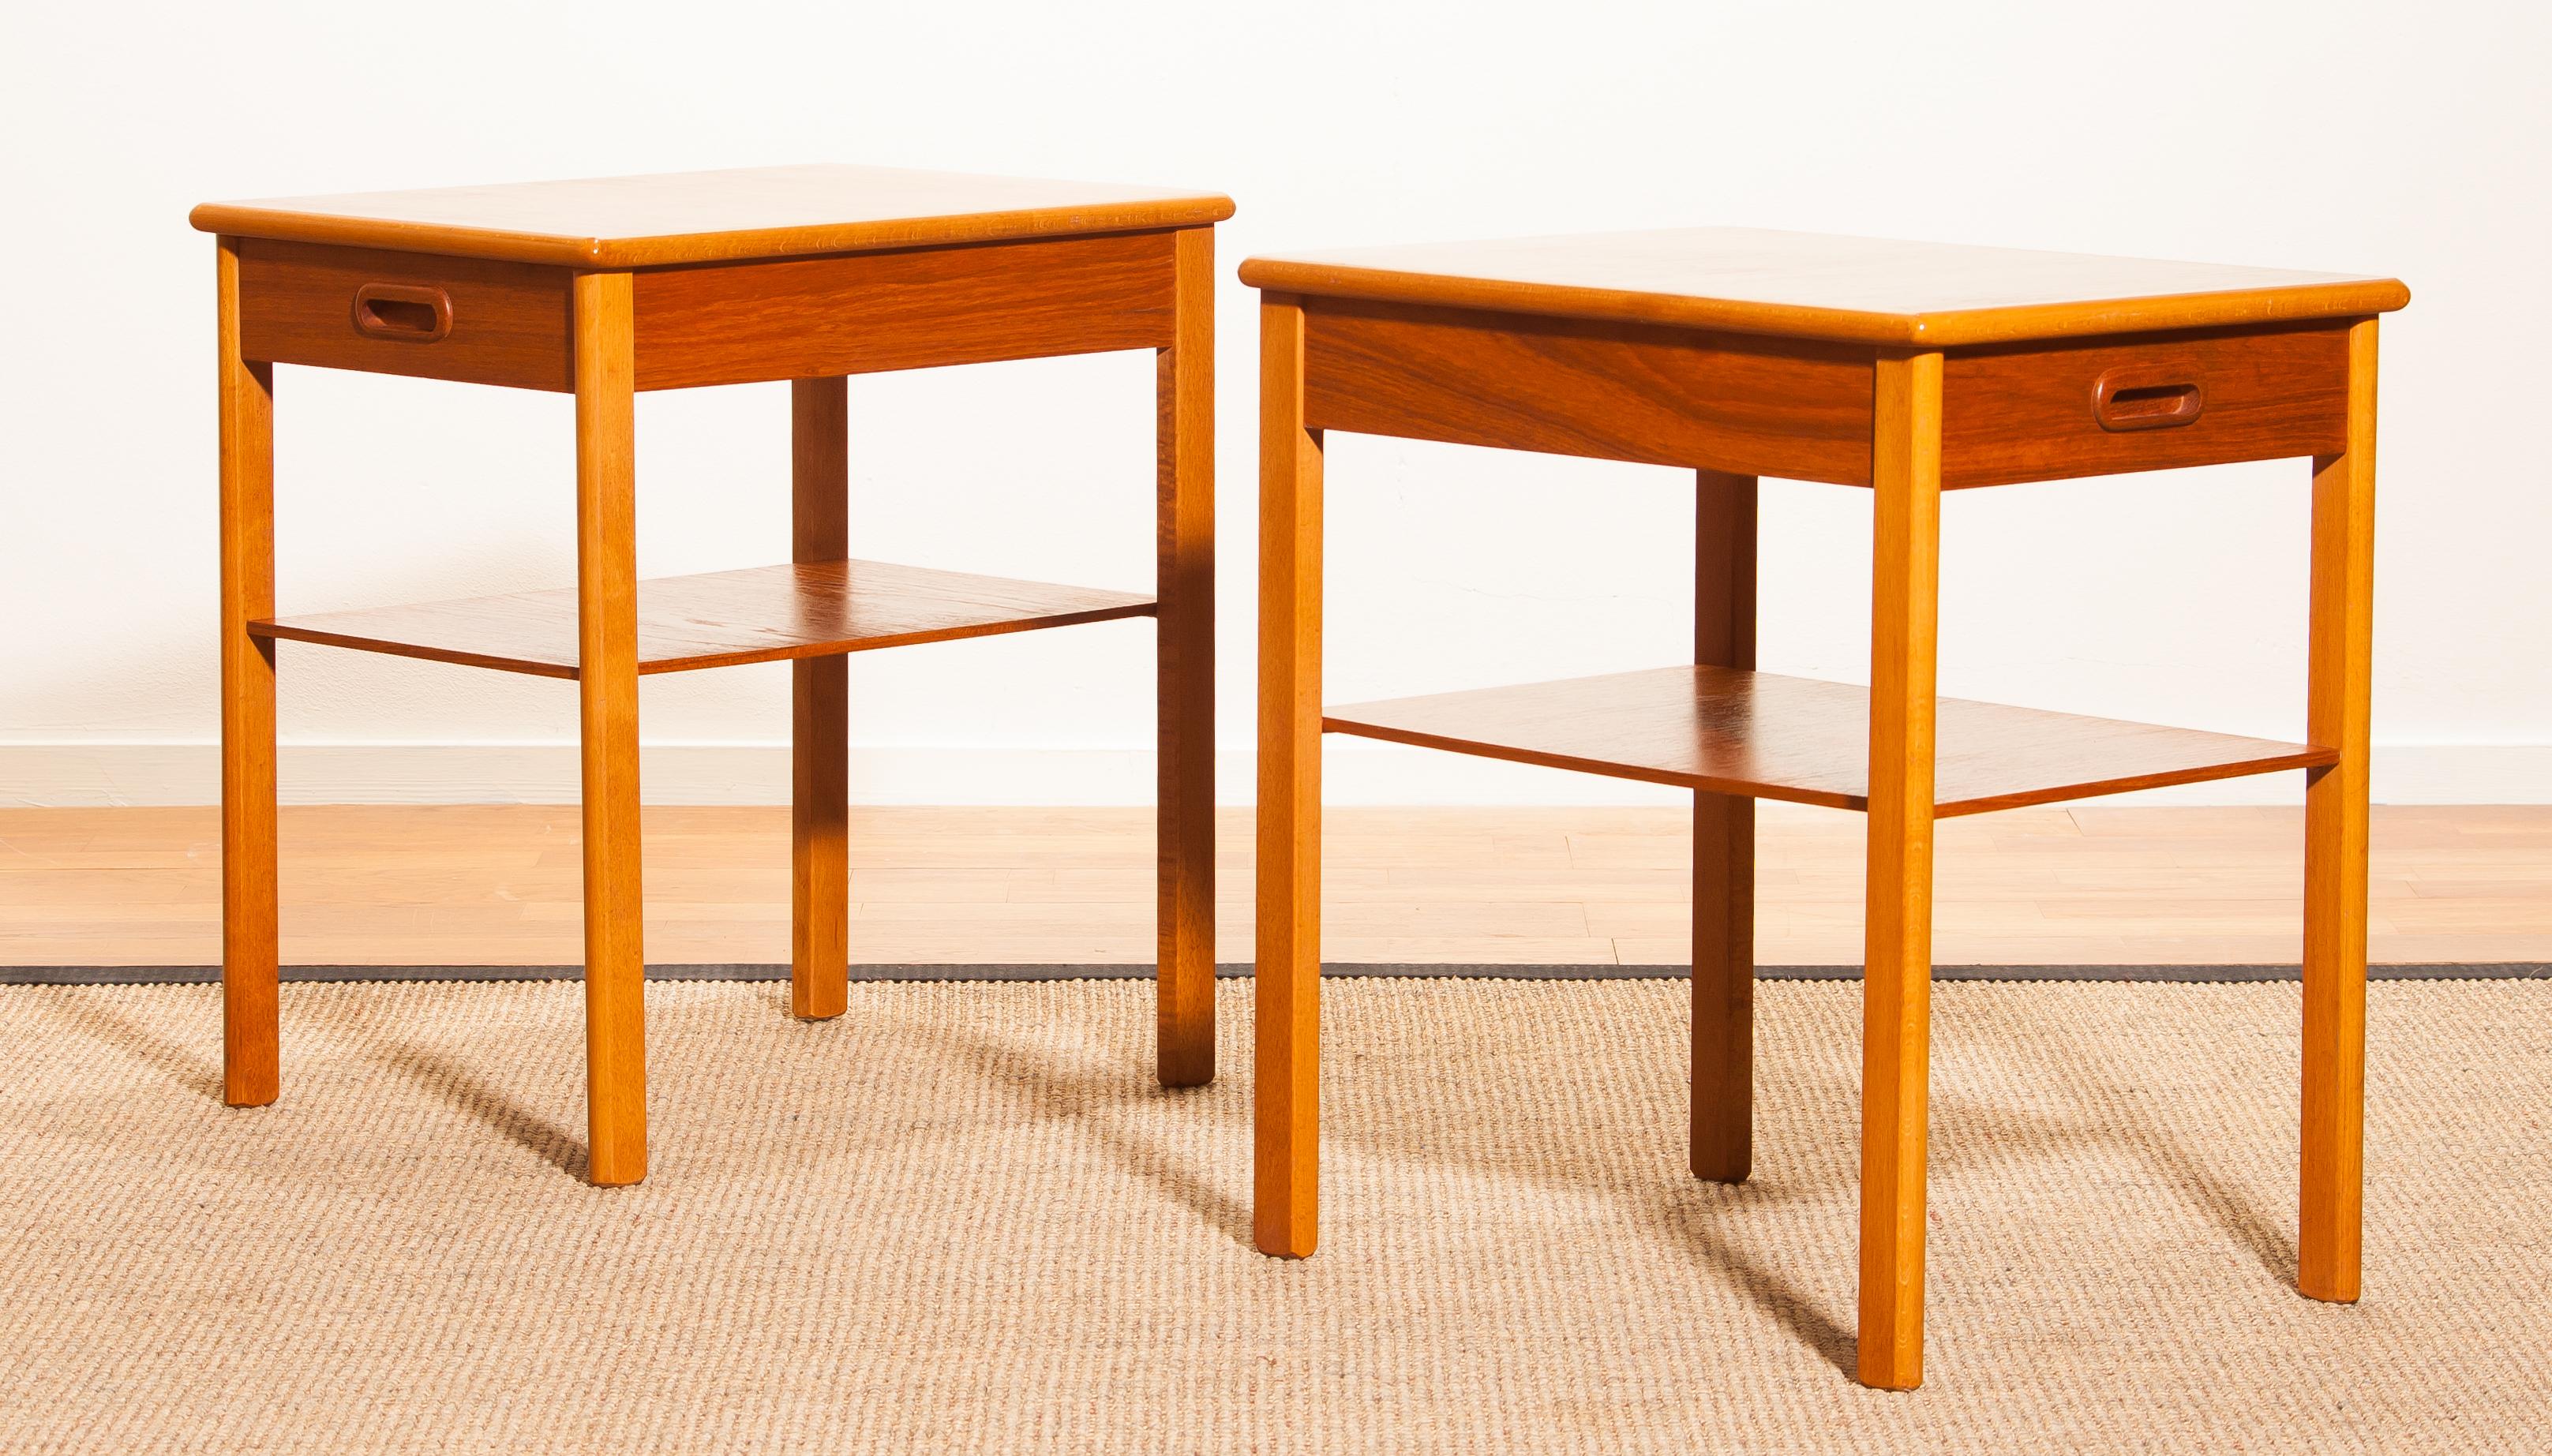 Beautiful pair of bedside tables by Säffle, Sweden.
These tables are made of teak and they have a drawer.
They are in very nice condition.
Period 1950s.
Dimensions: H 52 cm, W 36 cm, D 48 cm.